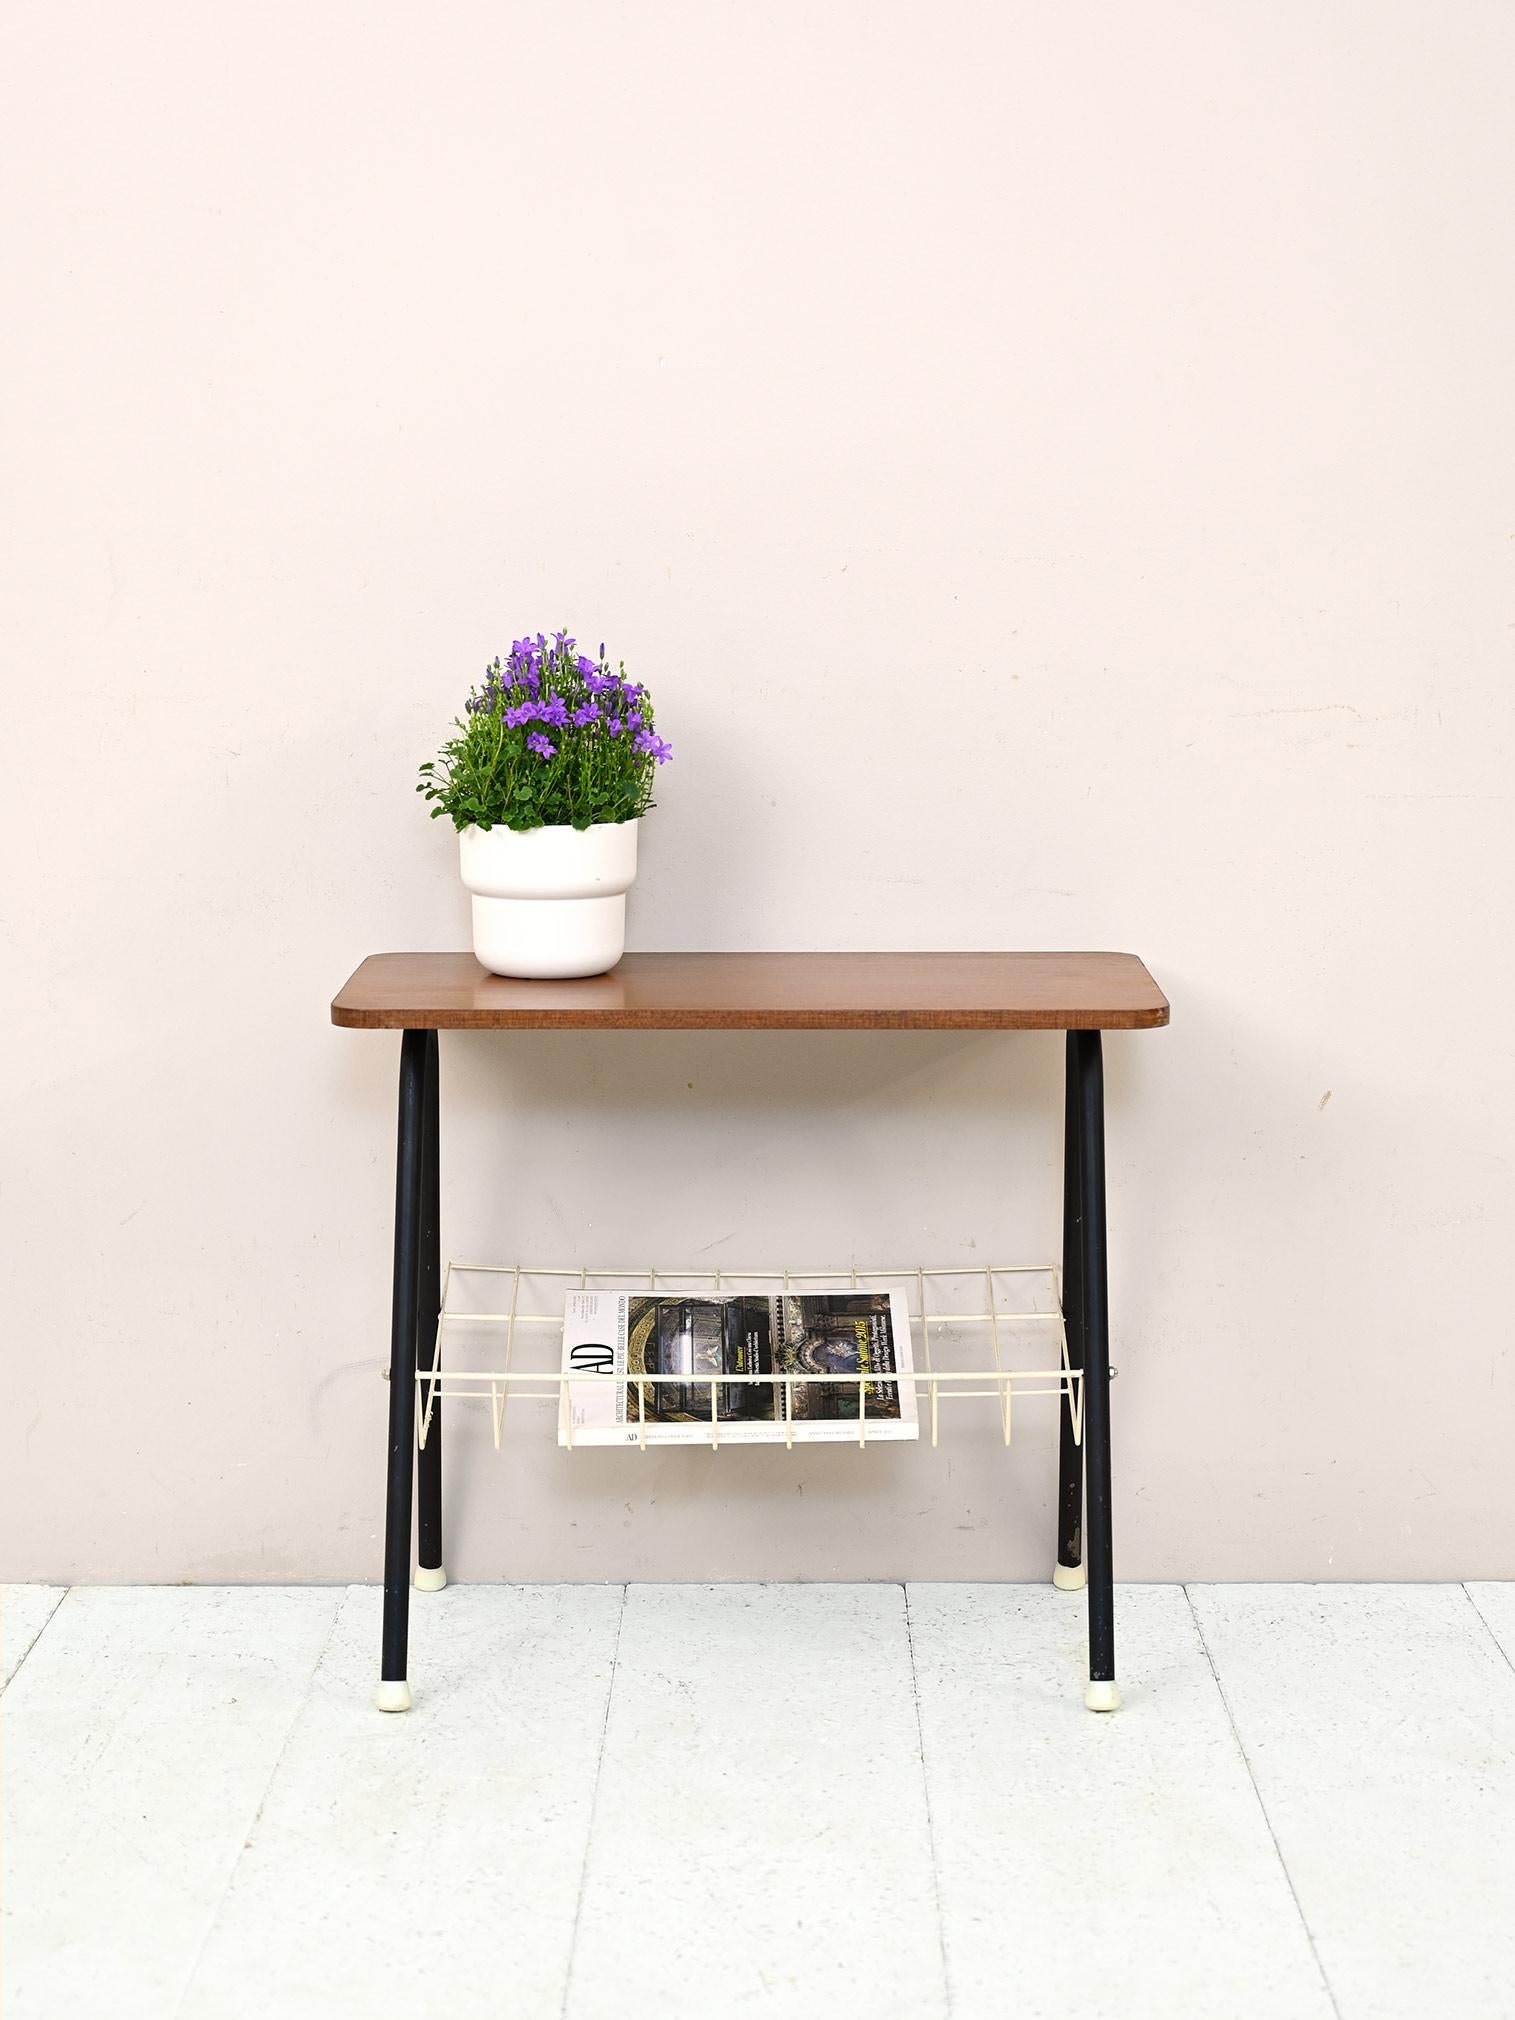 Scandinavian 1960s modern antique sofa table.

A piece of furniture with modern lines and strong character. Featuring black-painted tubular metal legs and a white metal magazine rack top.
The teak top, rectangular and with rounded corners, lends